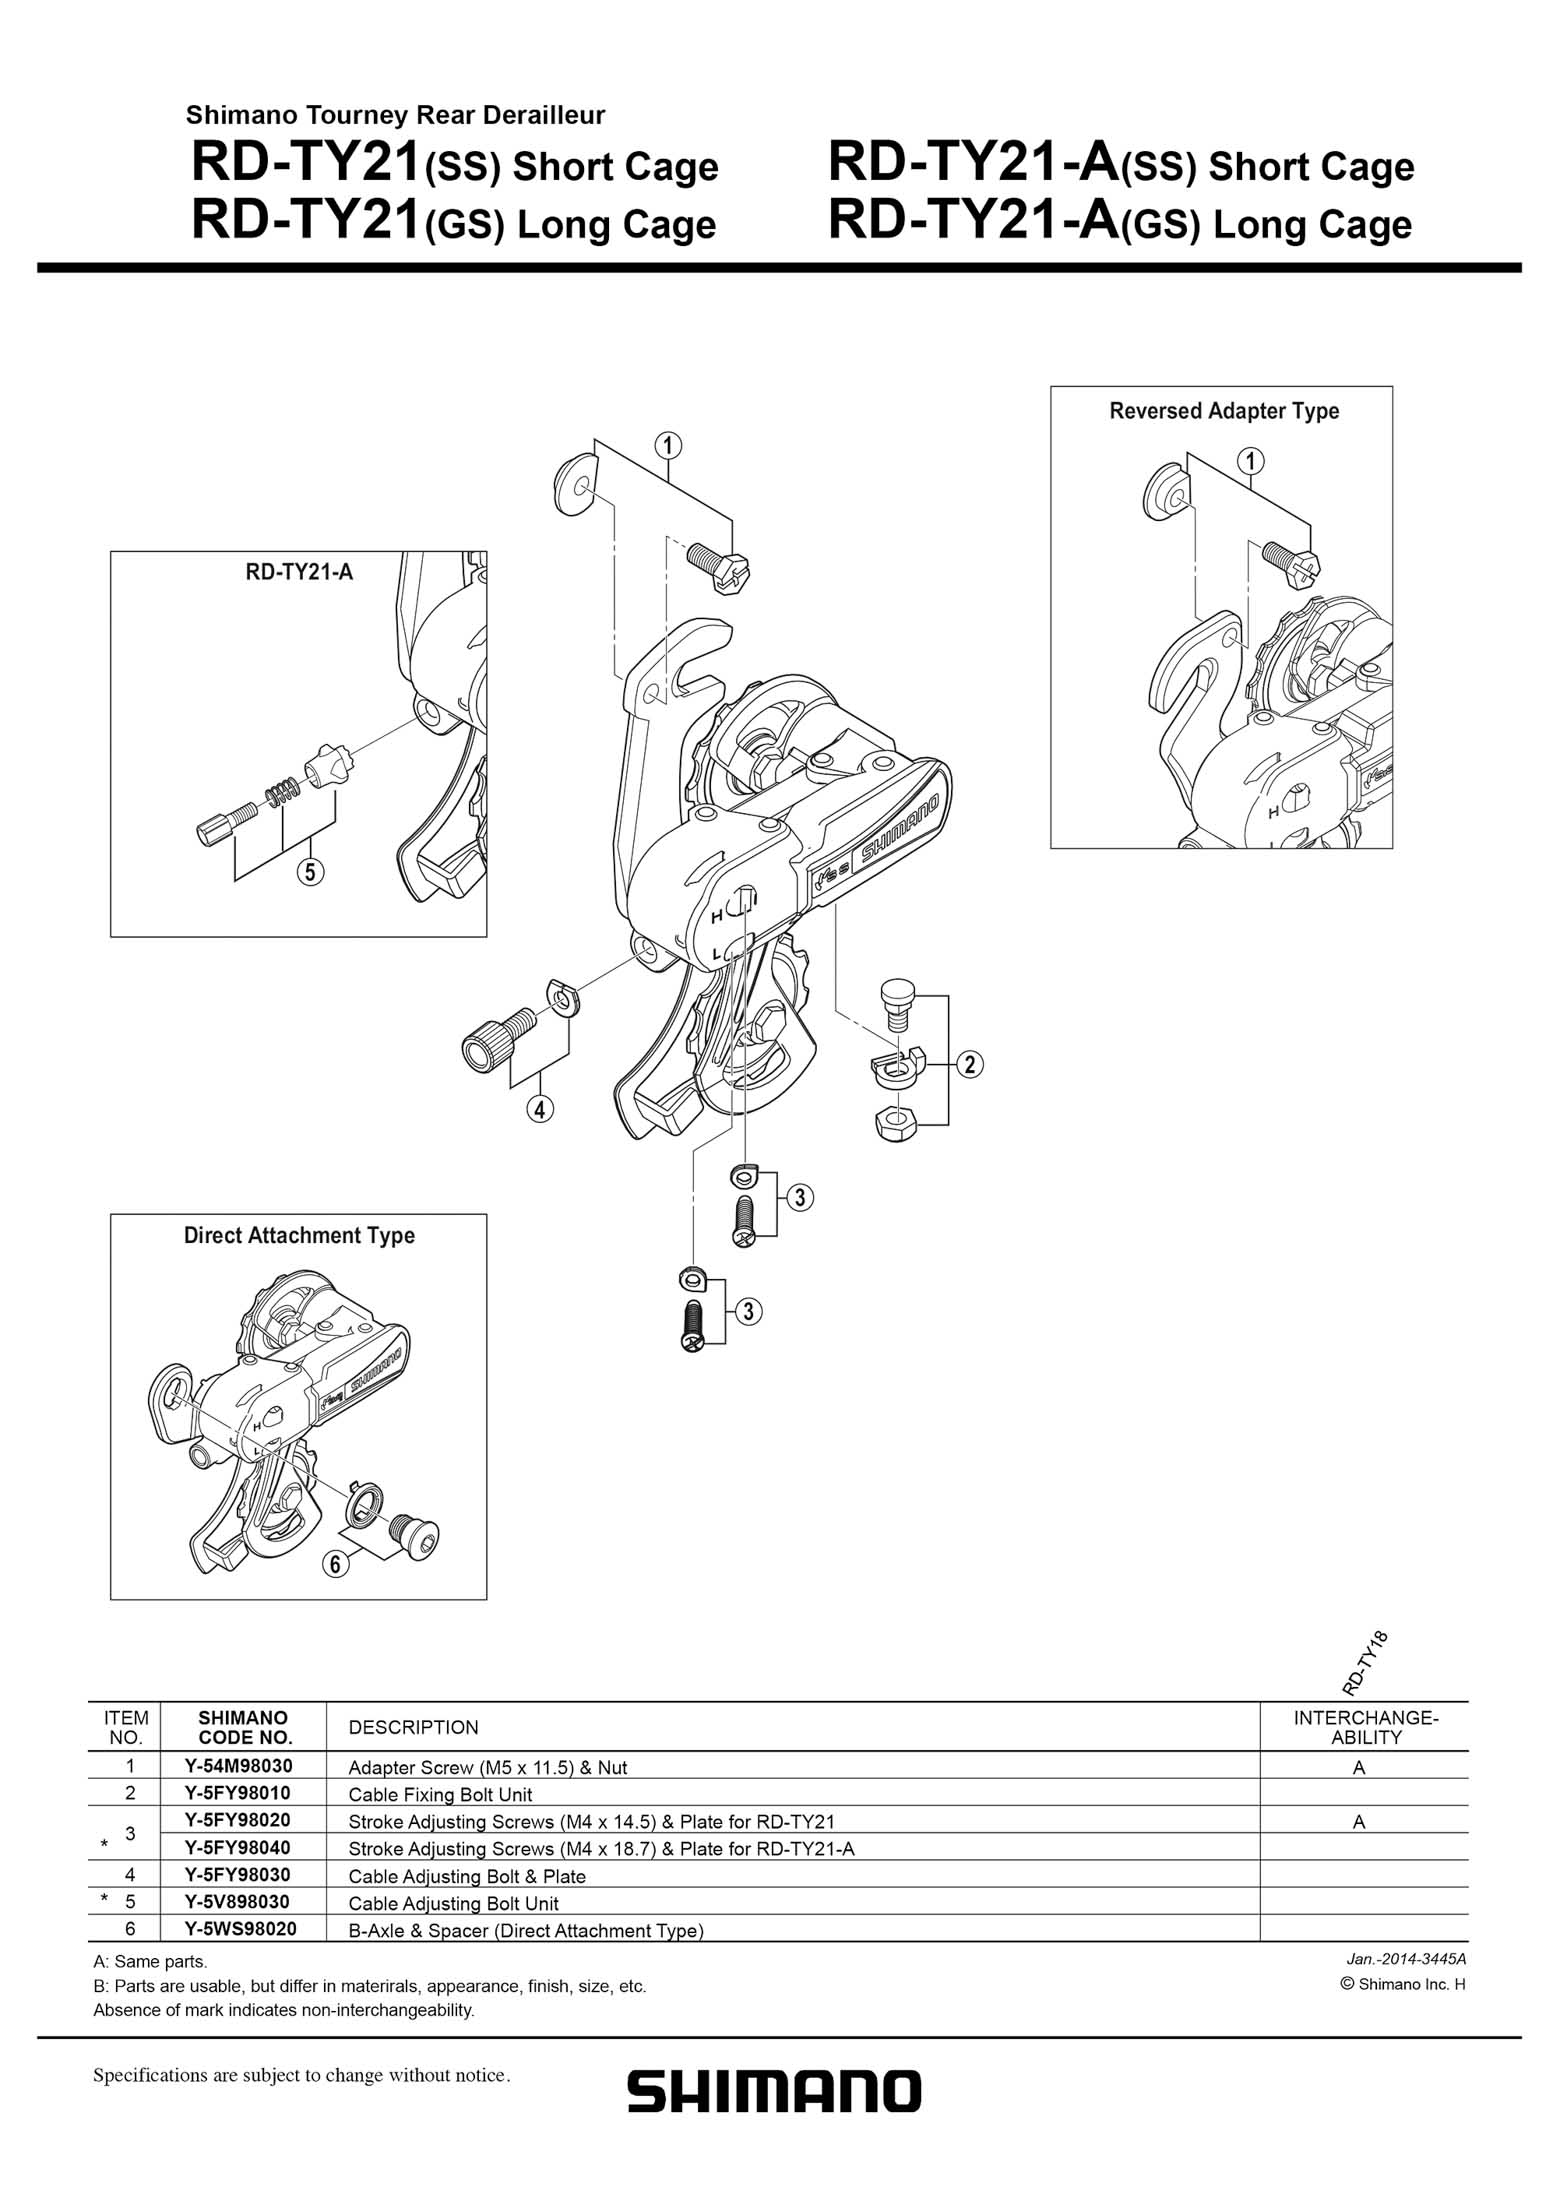 Shimano web site 2020 - exploded views from 2014 Tourney (TY21 series) main image